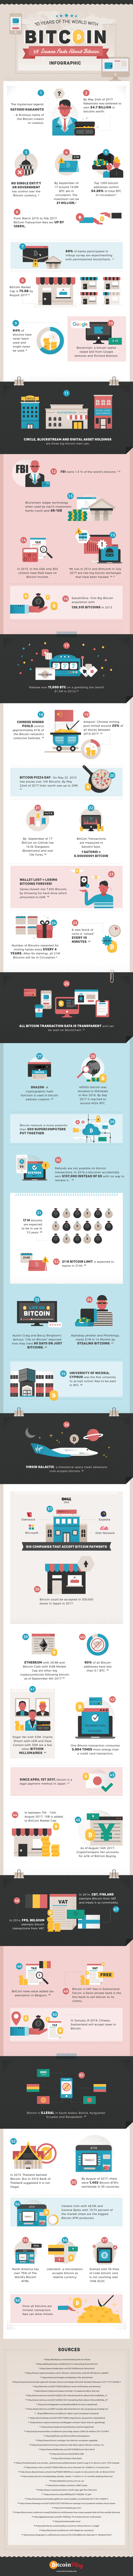 58 Insane Facts About Bitcoin - infographic